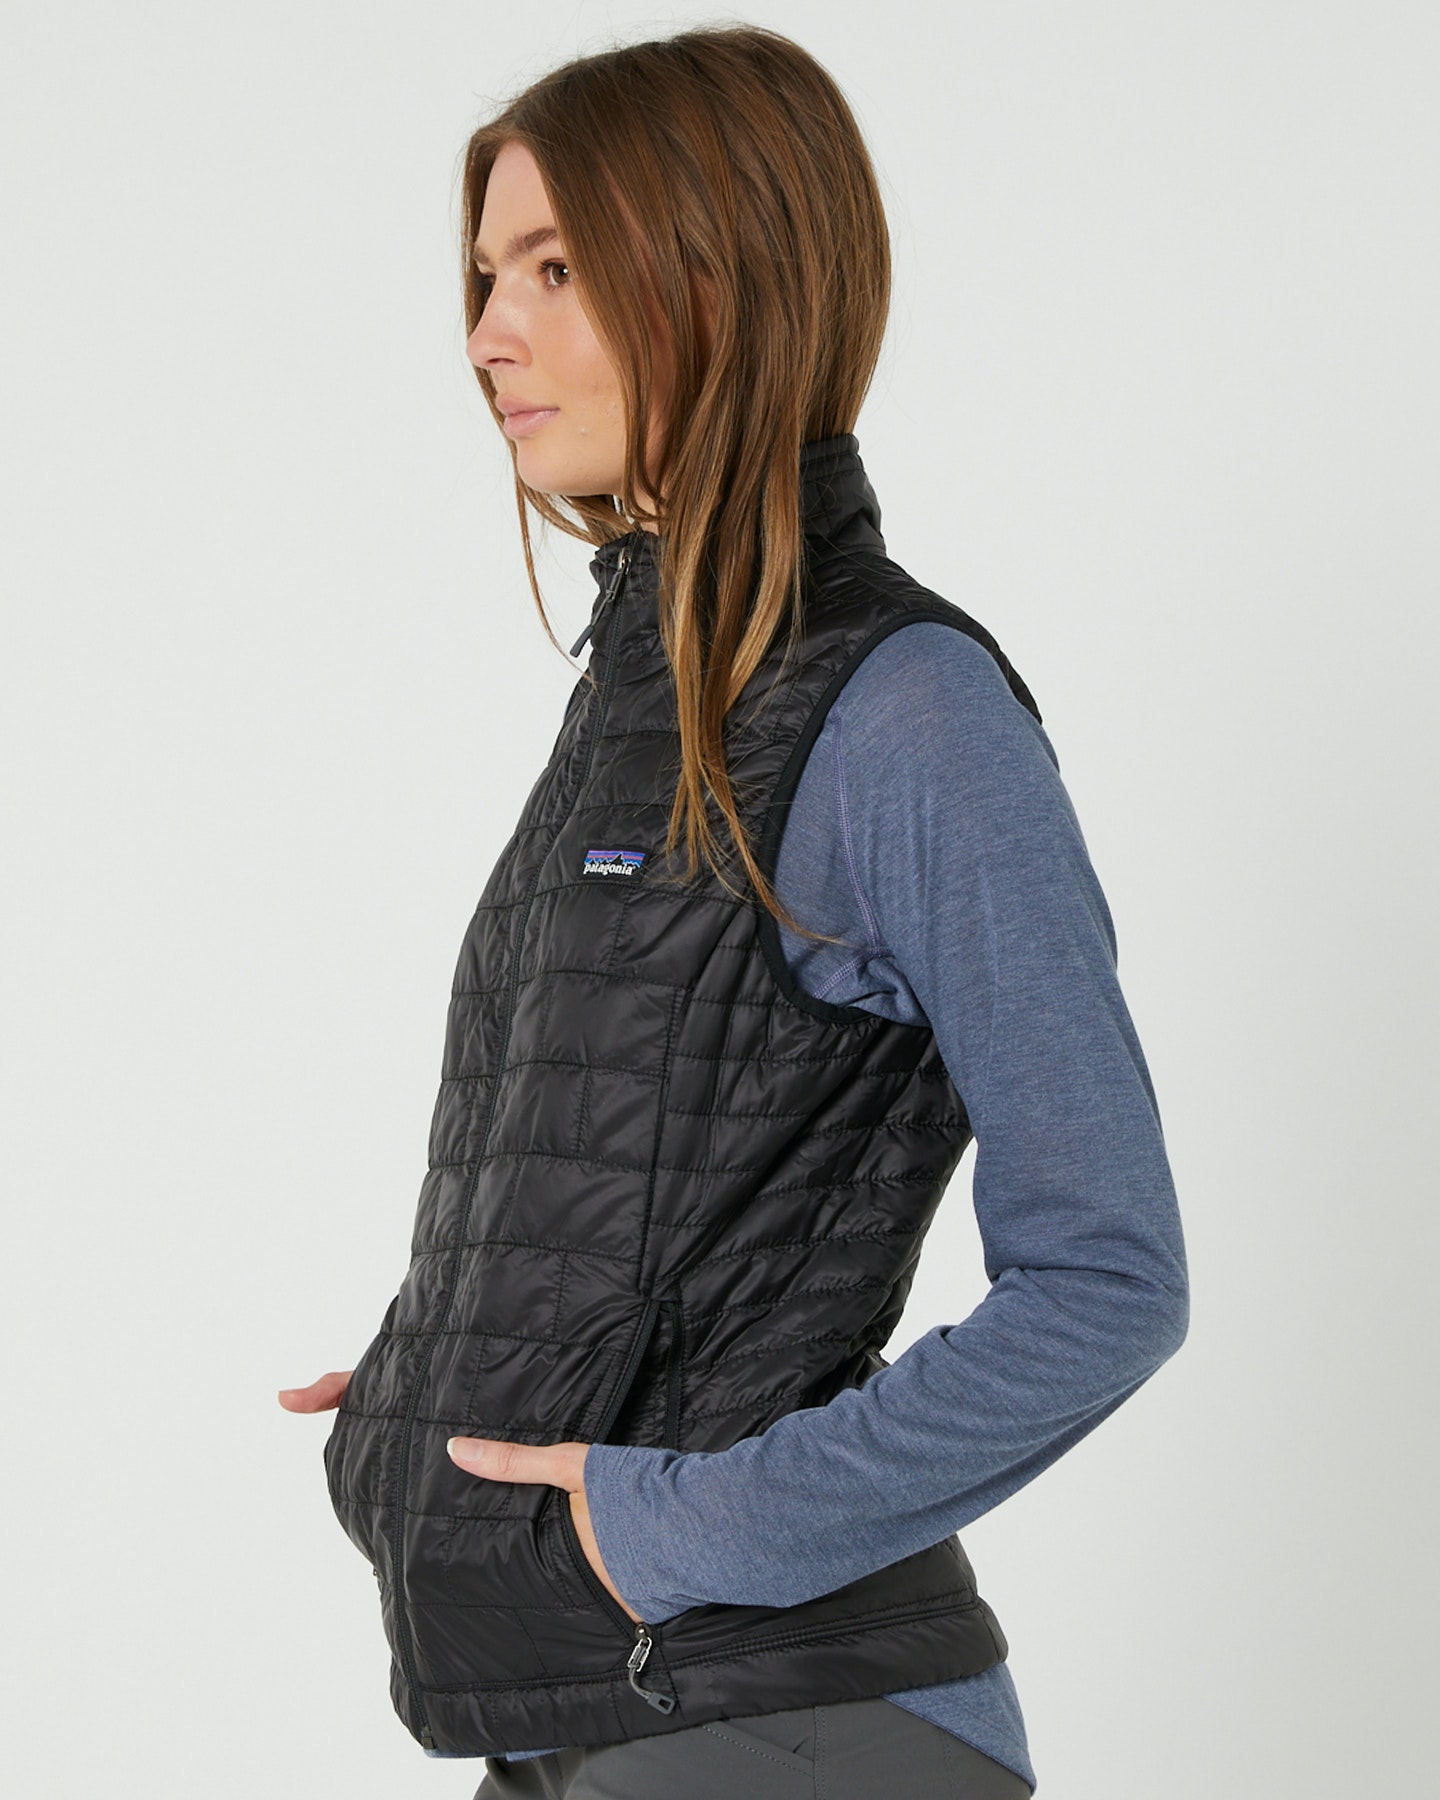 Patagonia Nano Puff Insulated Vest - Women's - Clothing